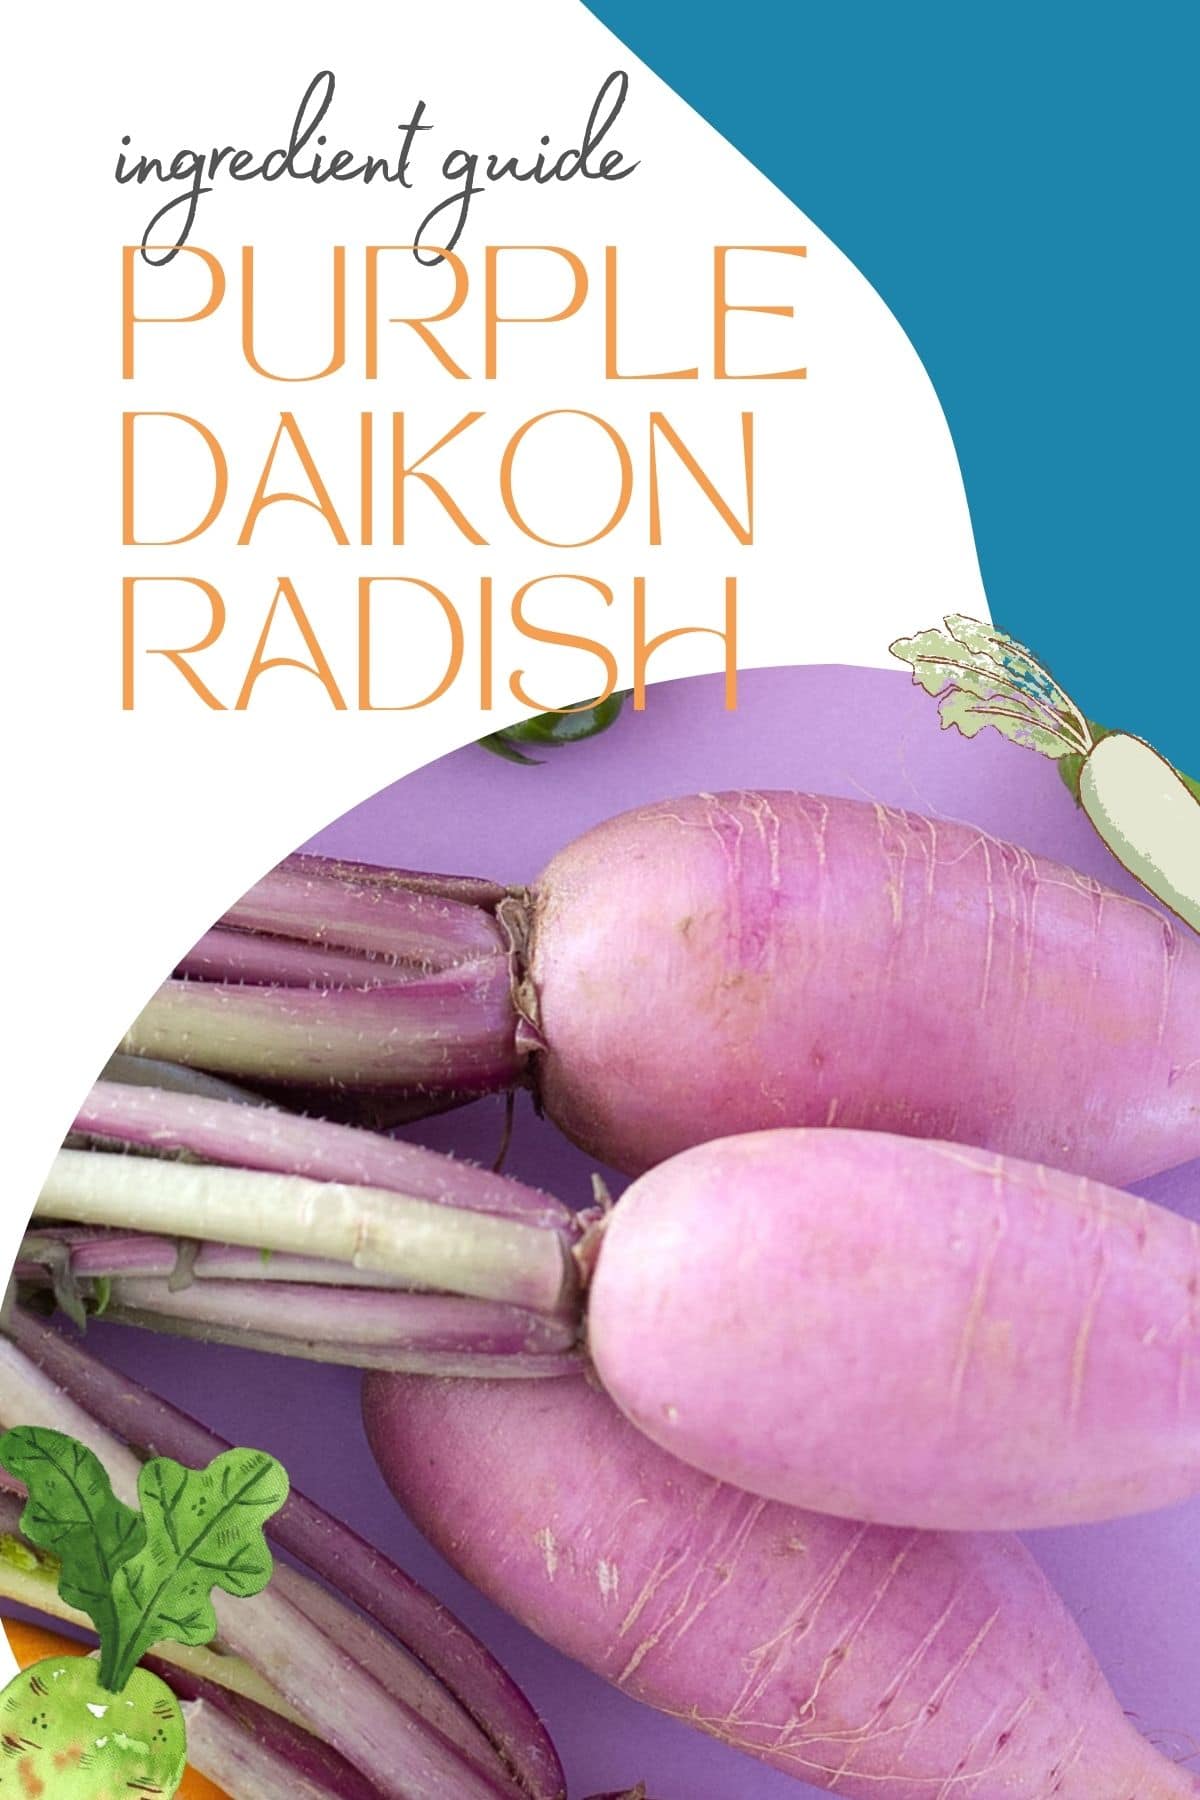 Text that reads, "ingredient guide: purple daikon radish" with a photo of a bunch of purple daikon radish below.